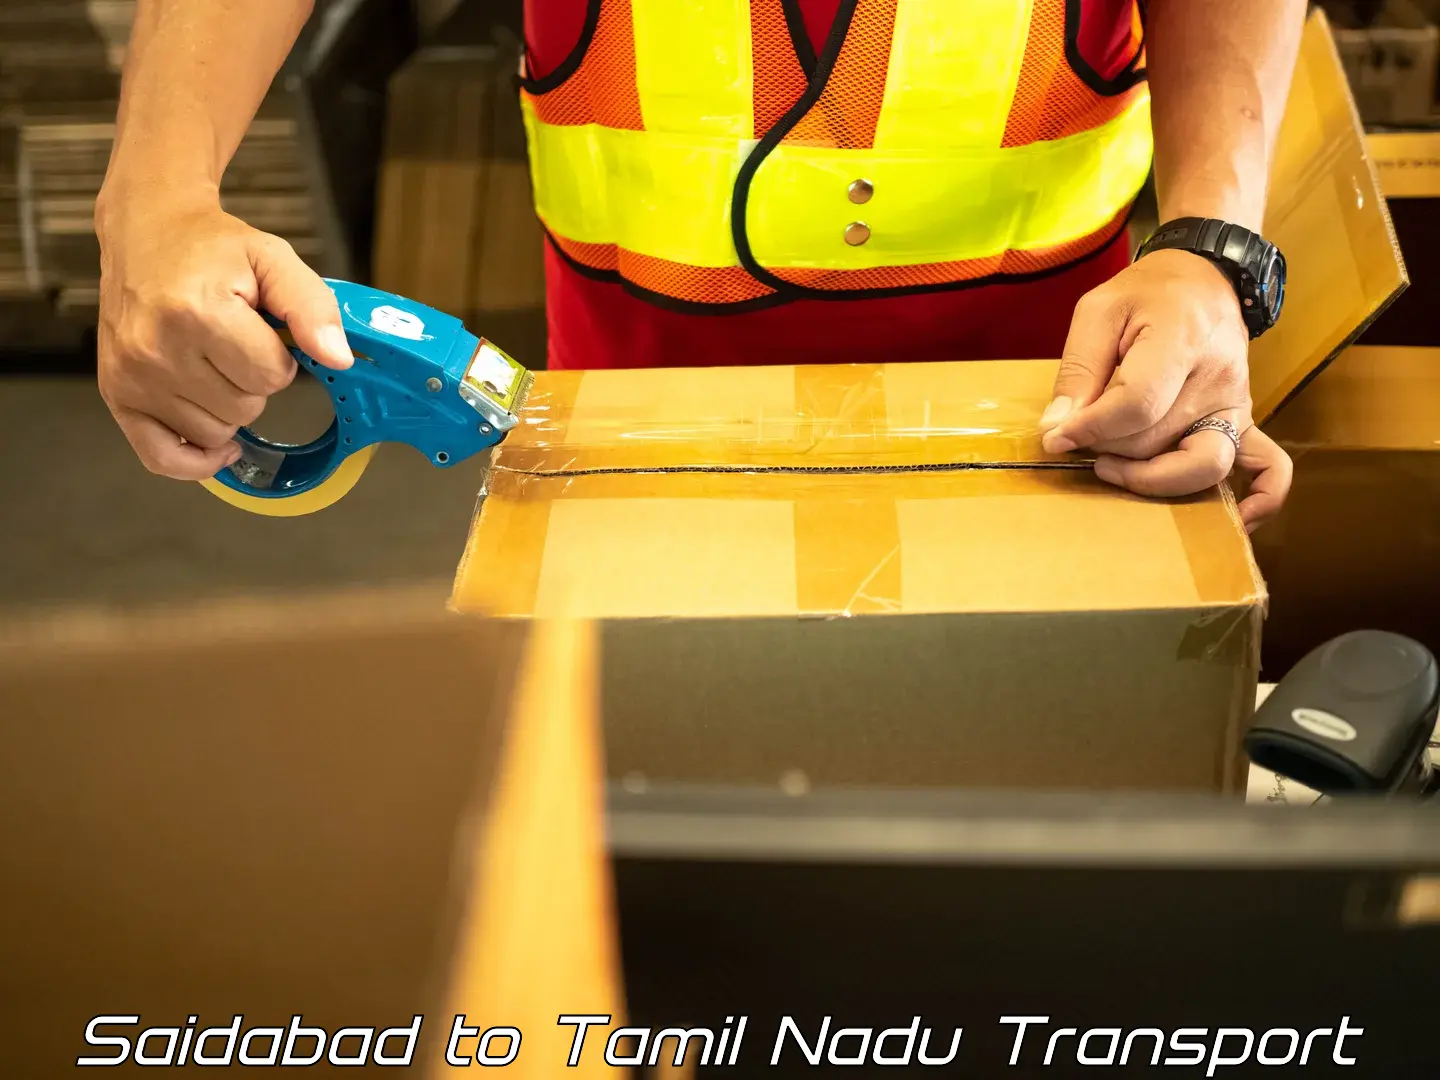 Express transport services in Saidabad to Tamil Nadu